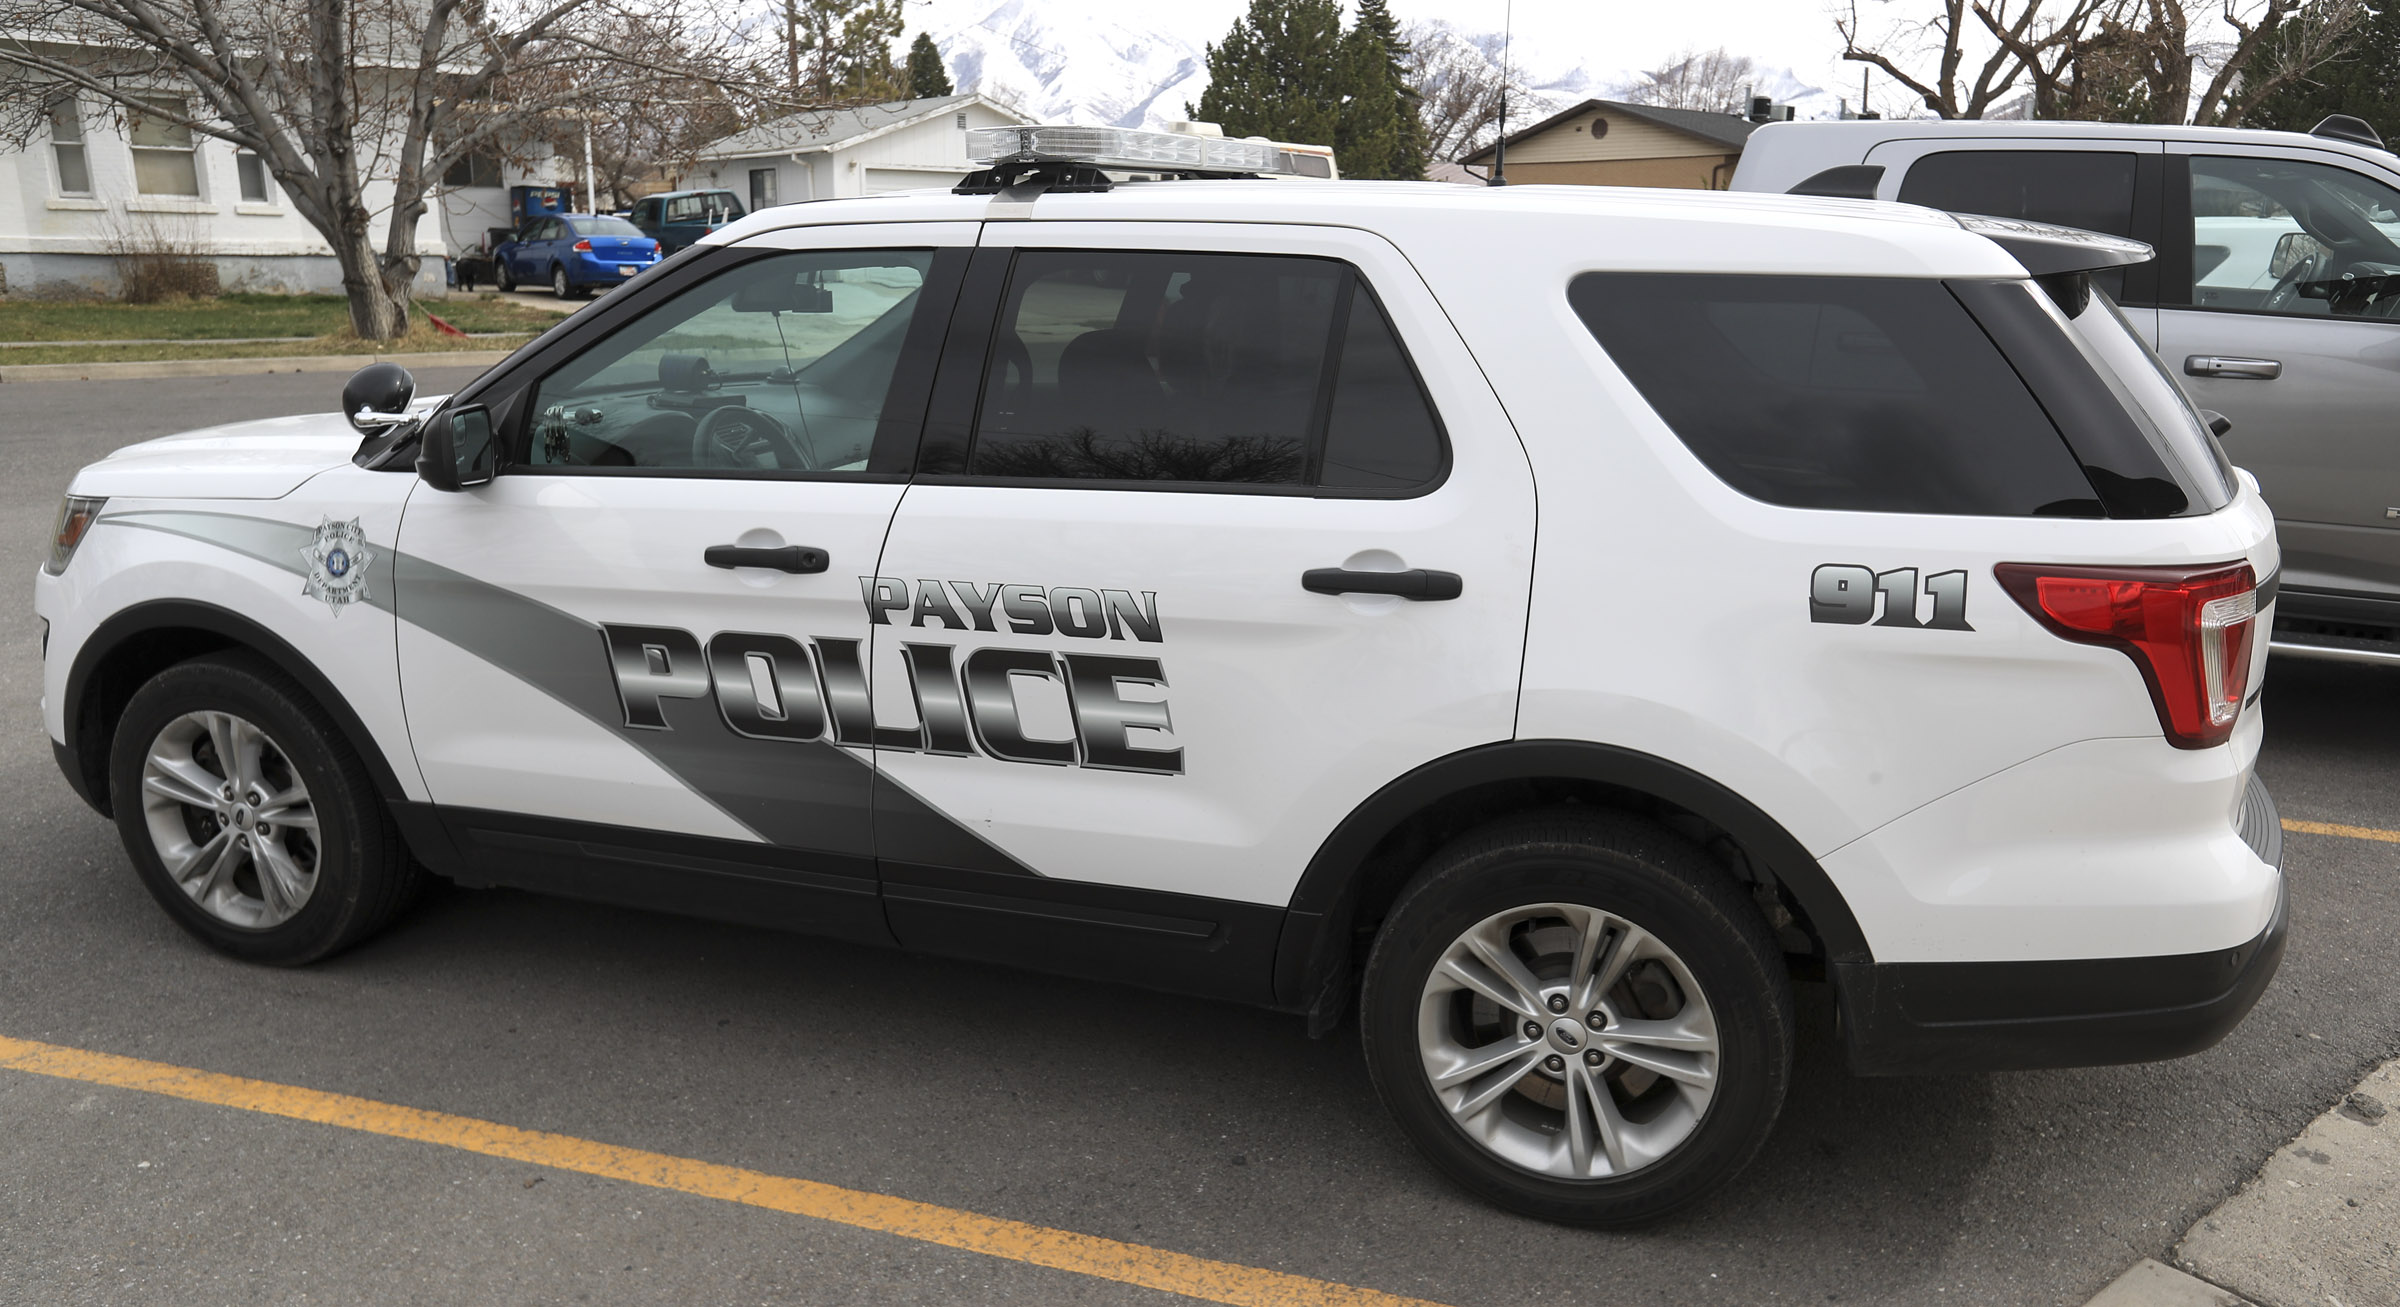 A Payson police vehicle is pictured on Monday, March 22, 2021. Payson Police say two people were sh...